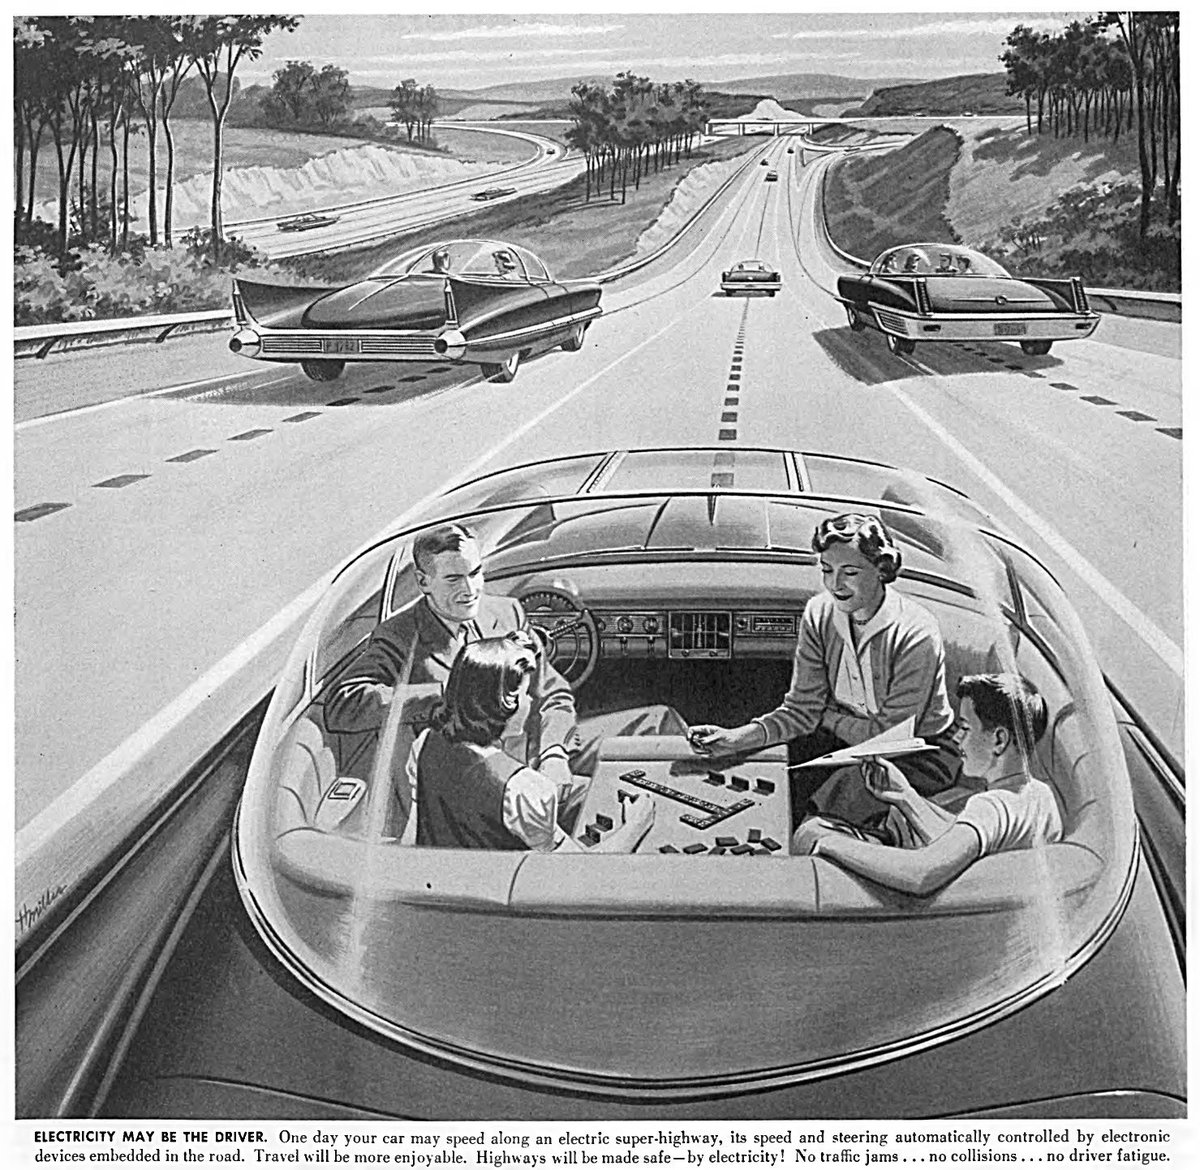 A vision of the future in 1956.